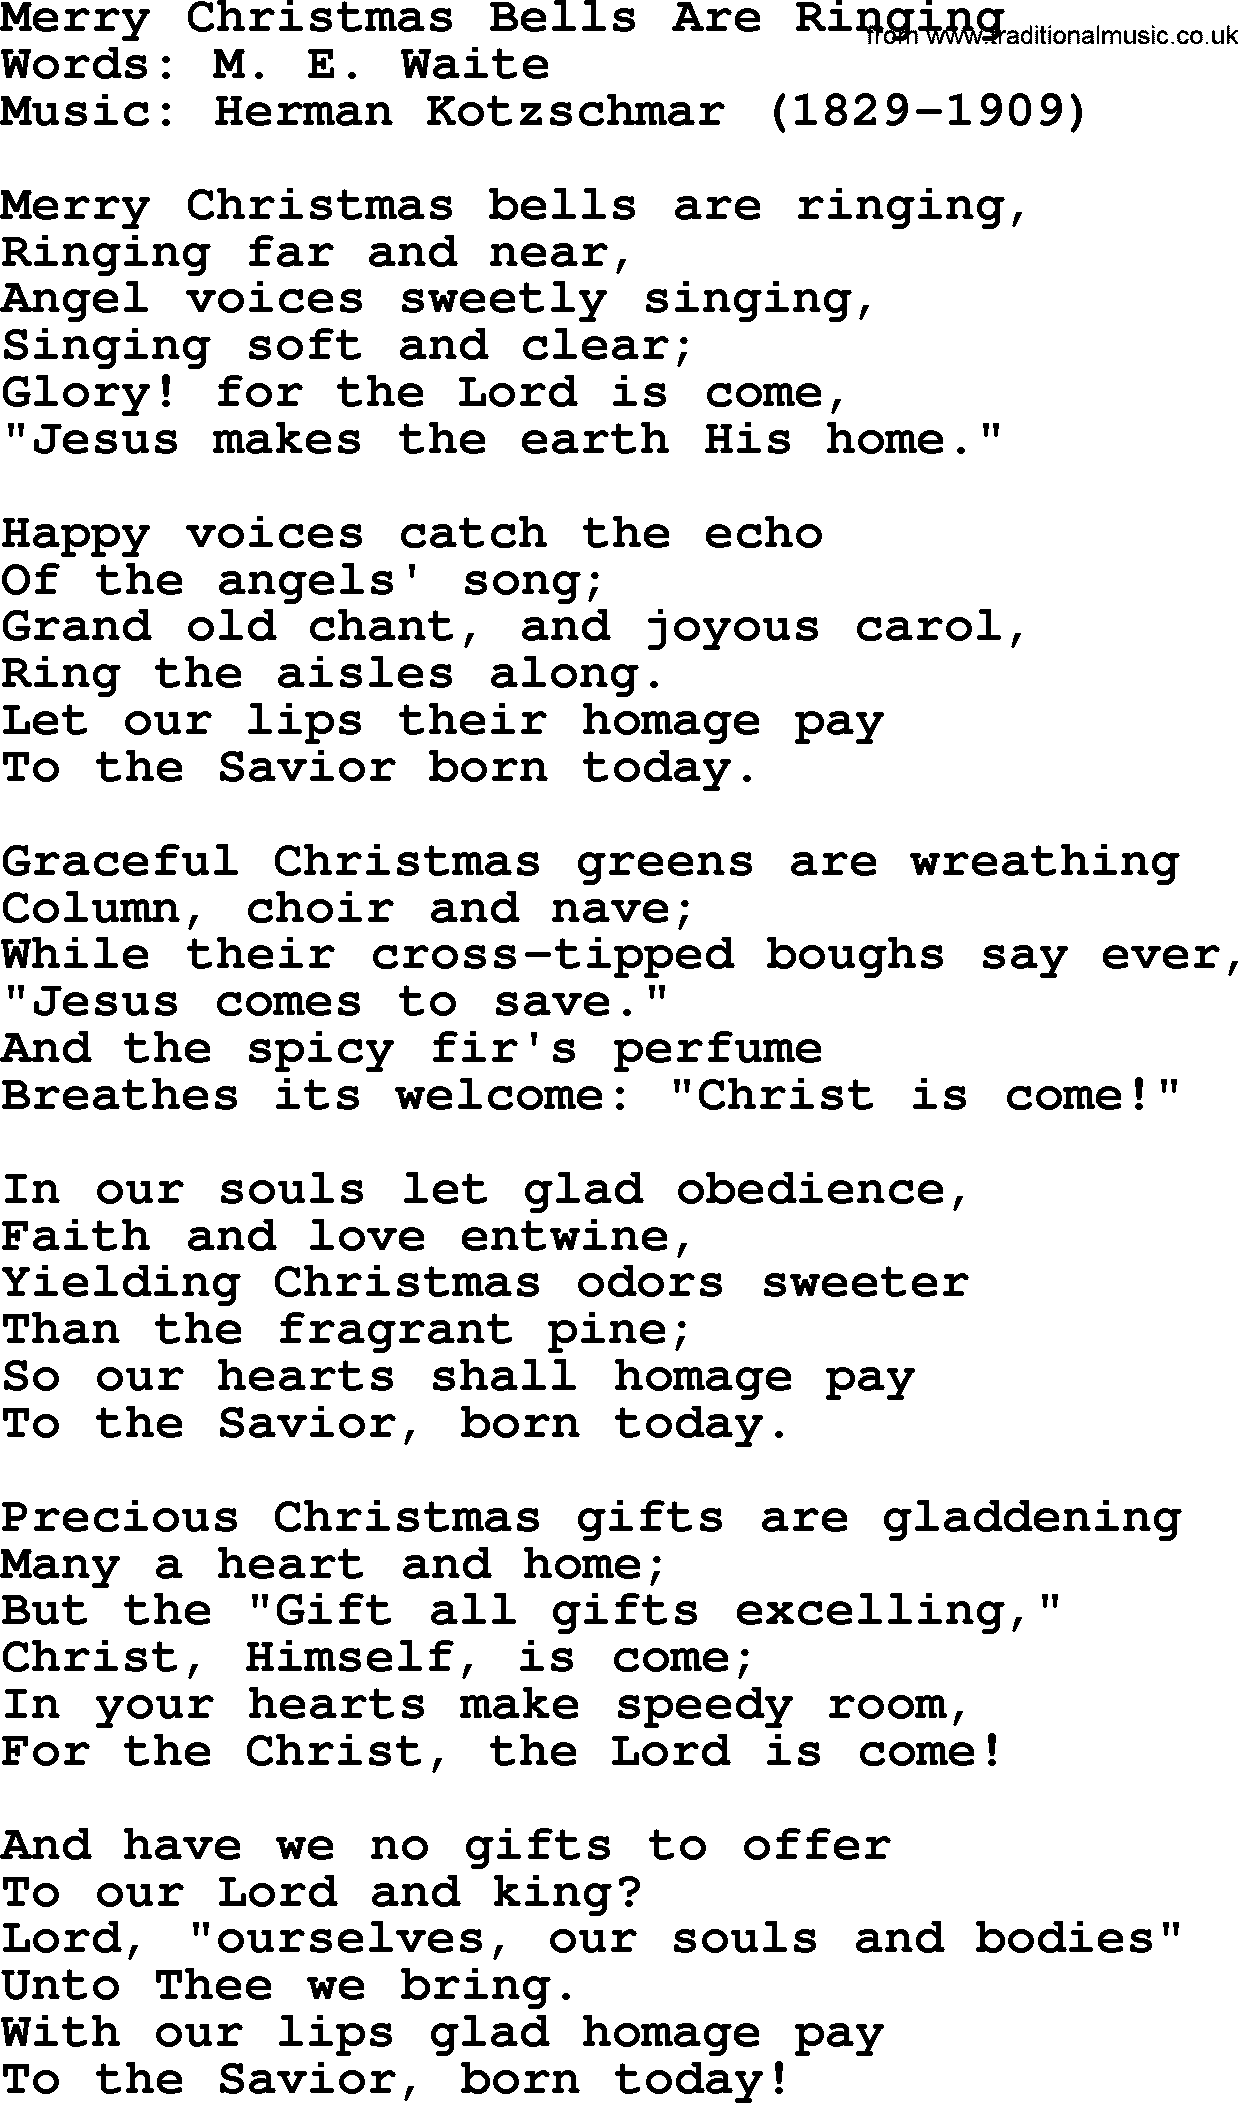 Hymns about Angels, Hymn: Merry Christmas Bells Are Ringing.txt lyrics with PDF